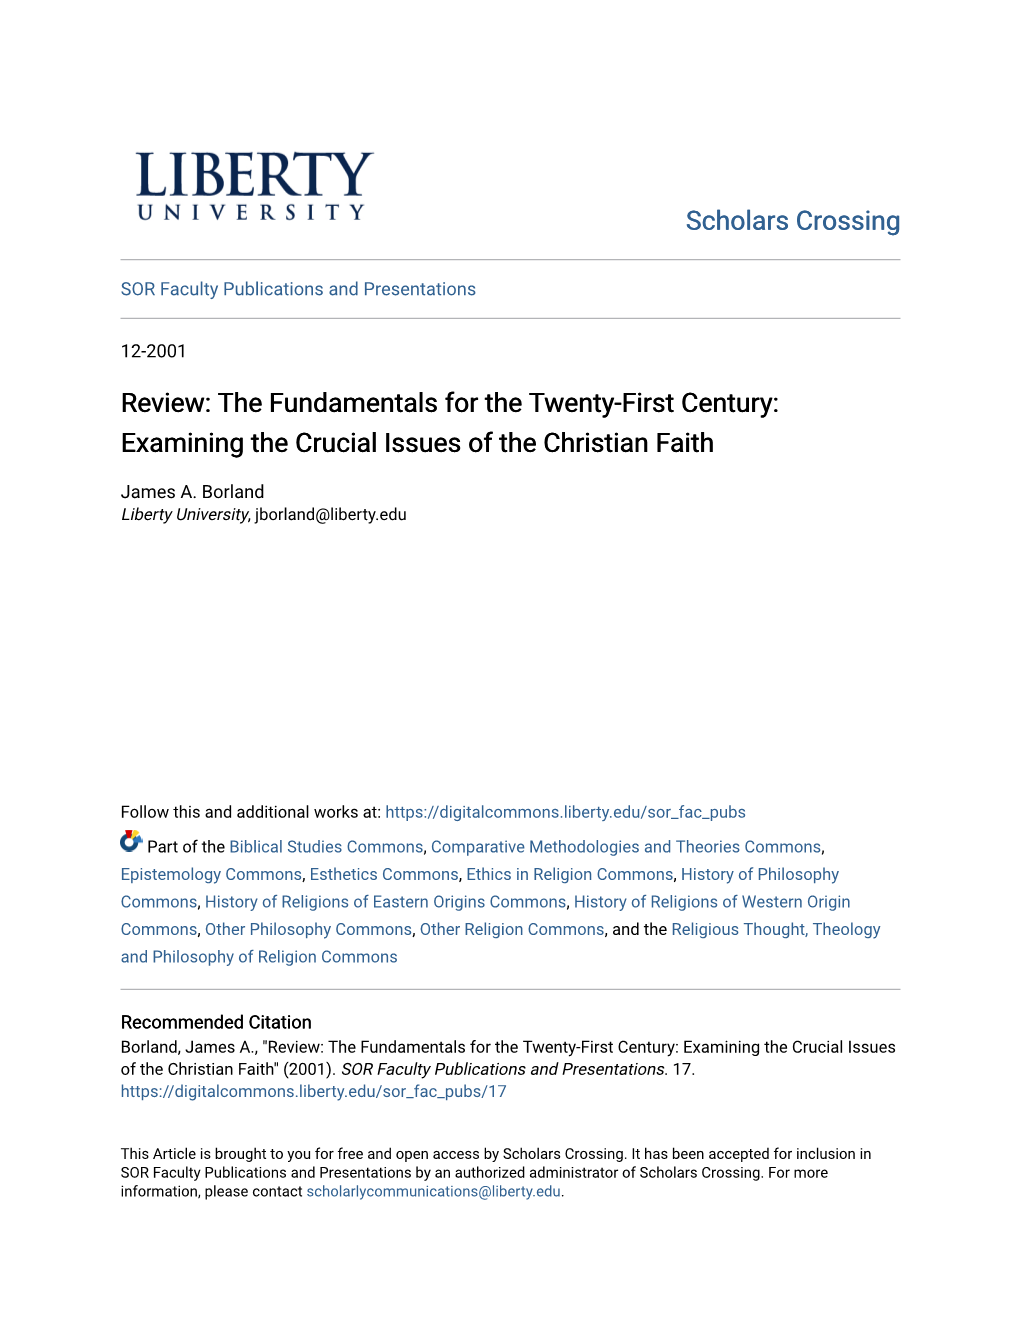 Review: the Fundamentals for the Twenty-First Century: Examining the Crucial Issues of the Christian Faith